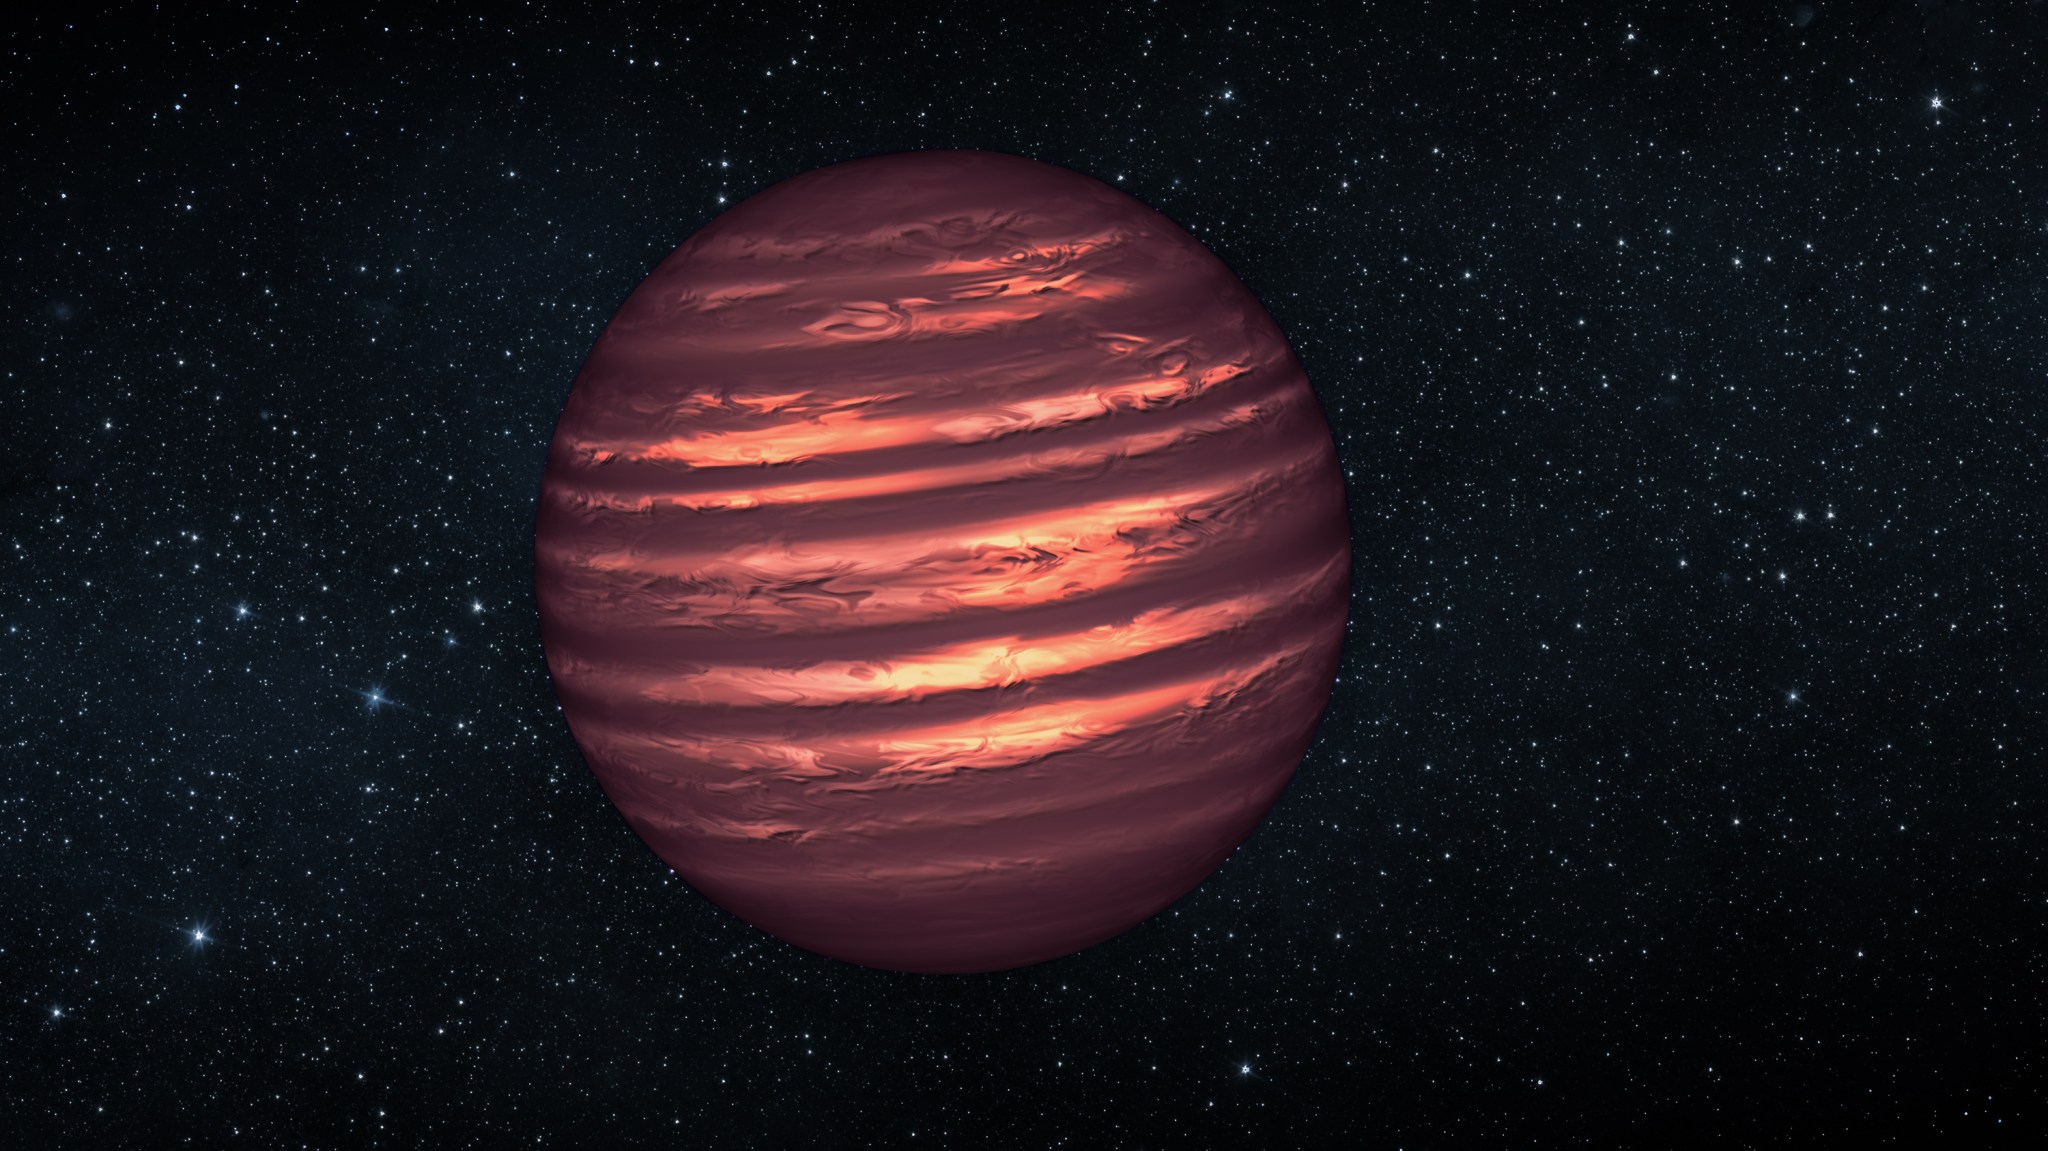 Artist’s conception of a brown dwarf, featuring the cloudy atmosphere of a planet and the residual light of an almost-star.